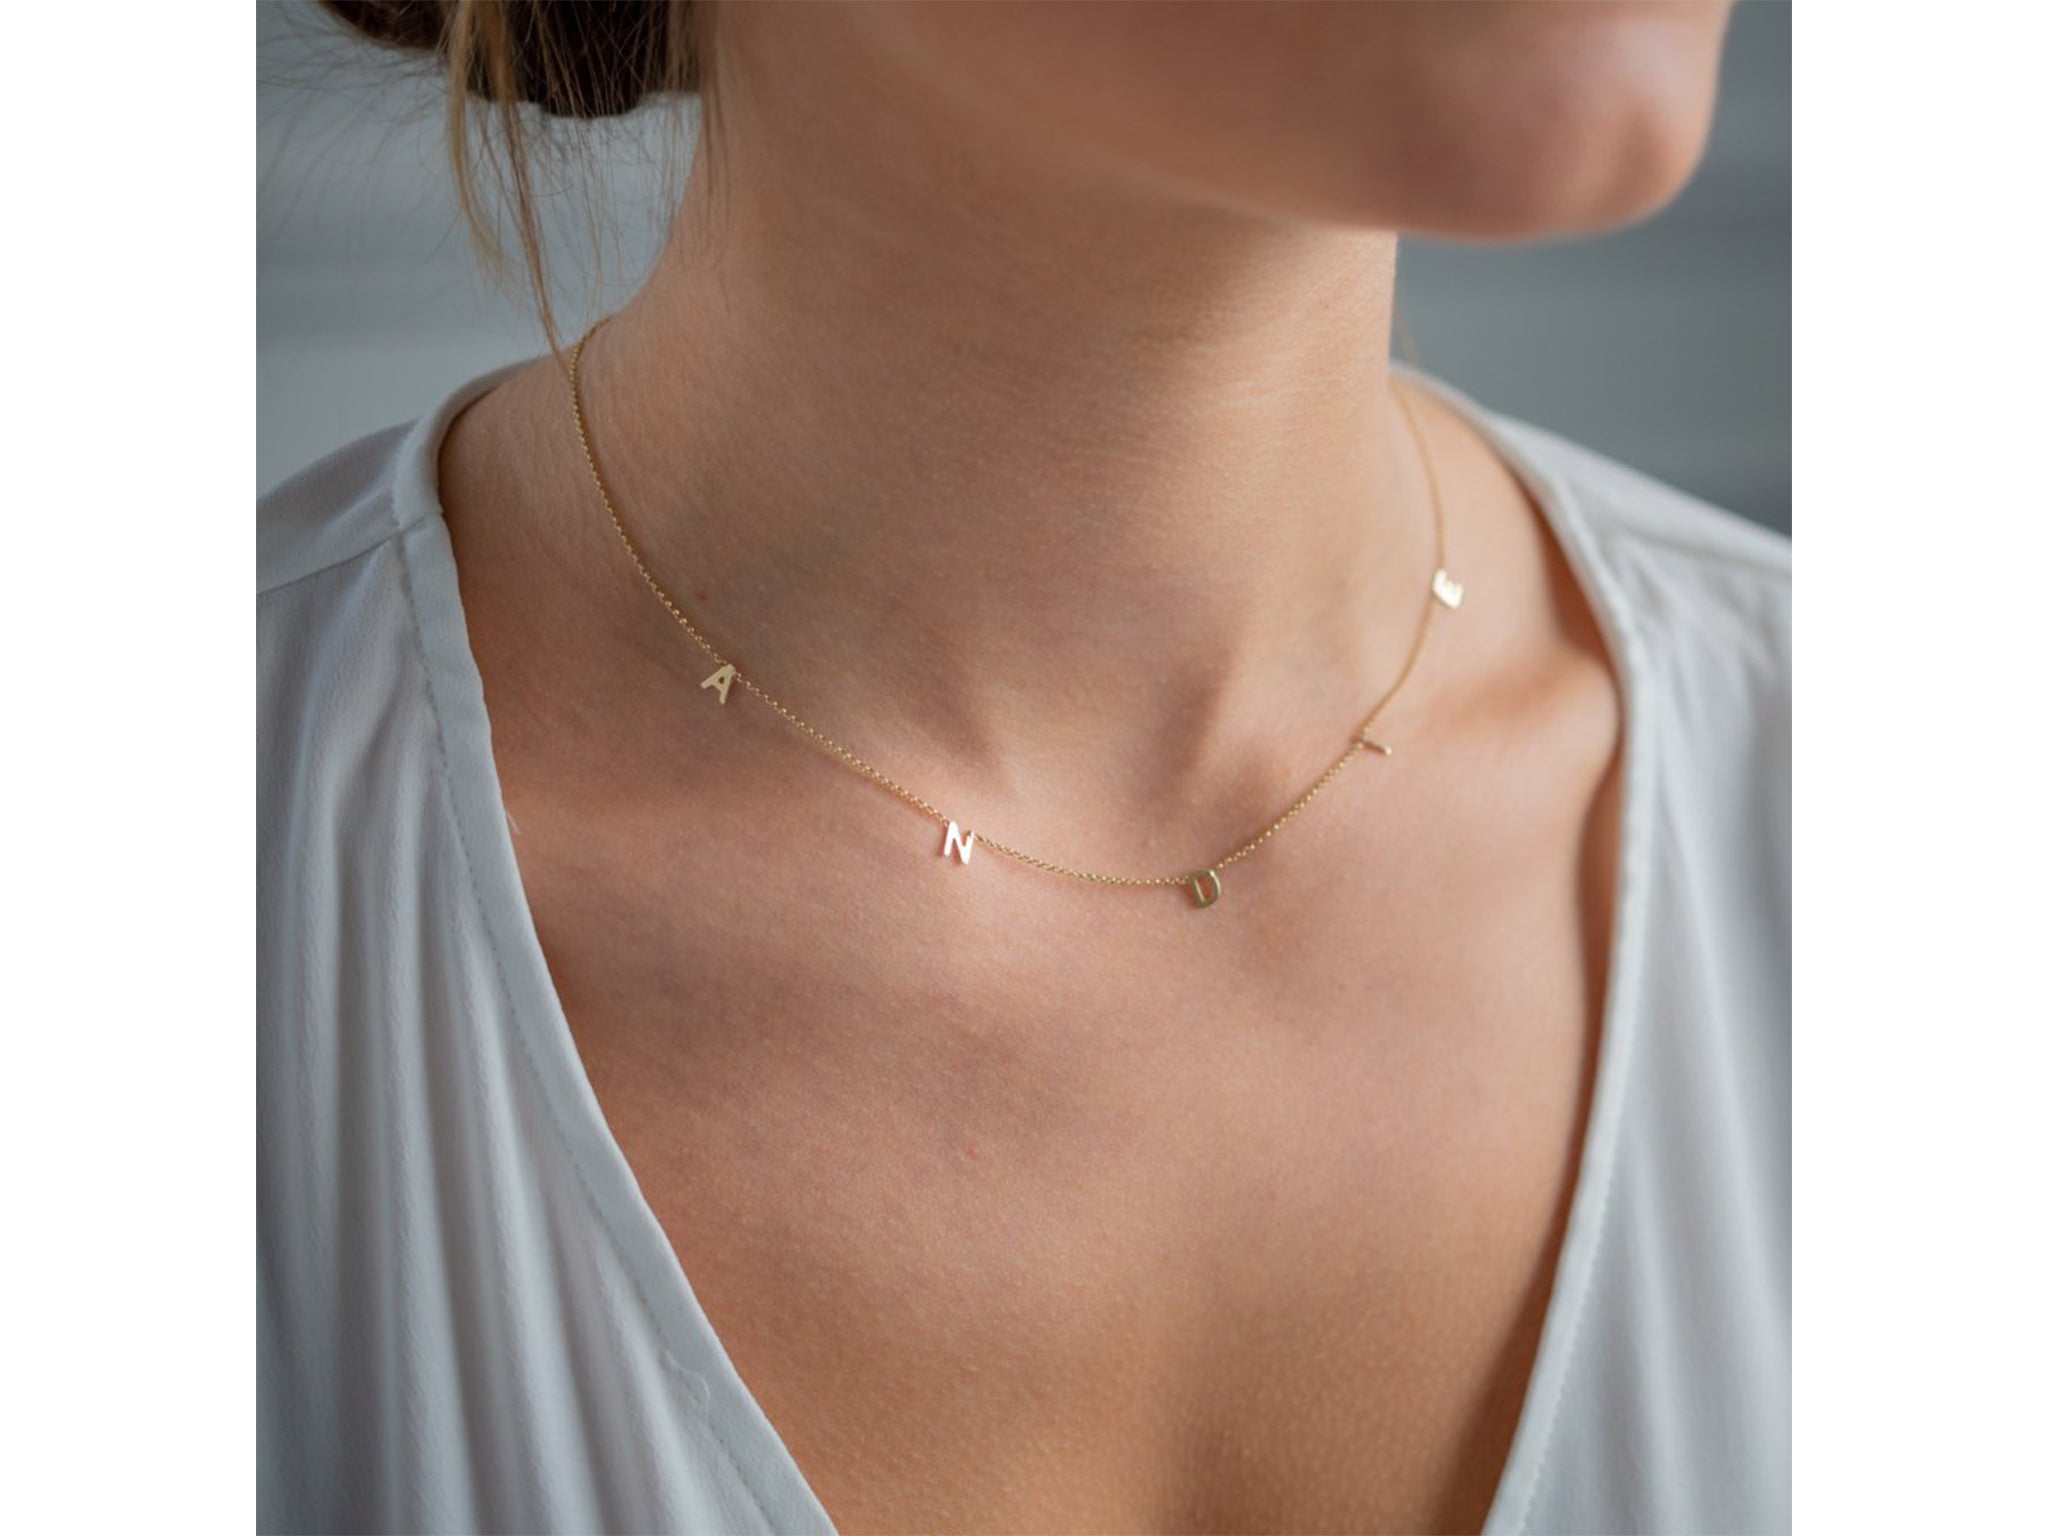 Decorate your décolletage with this dainty letter necklace